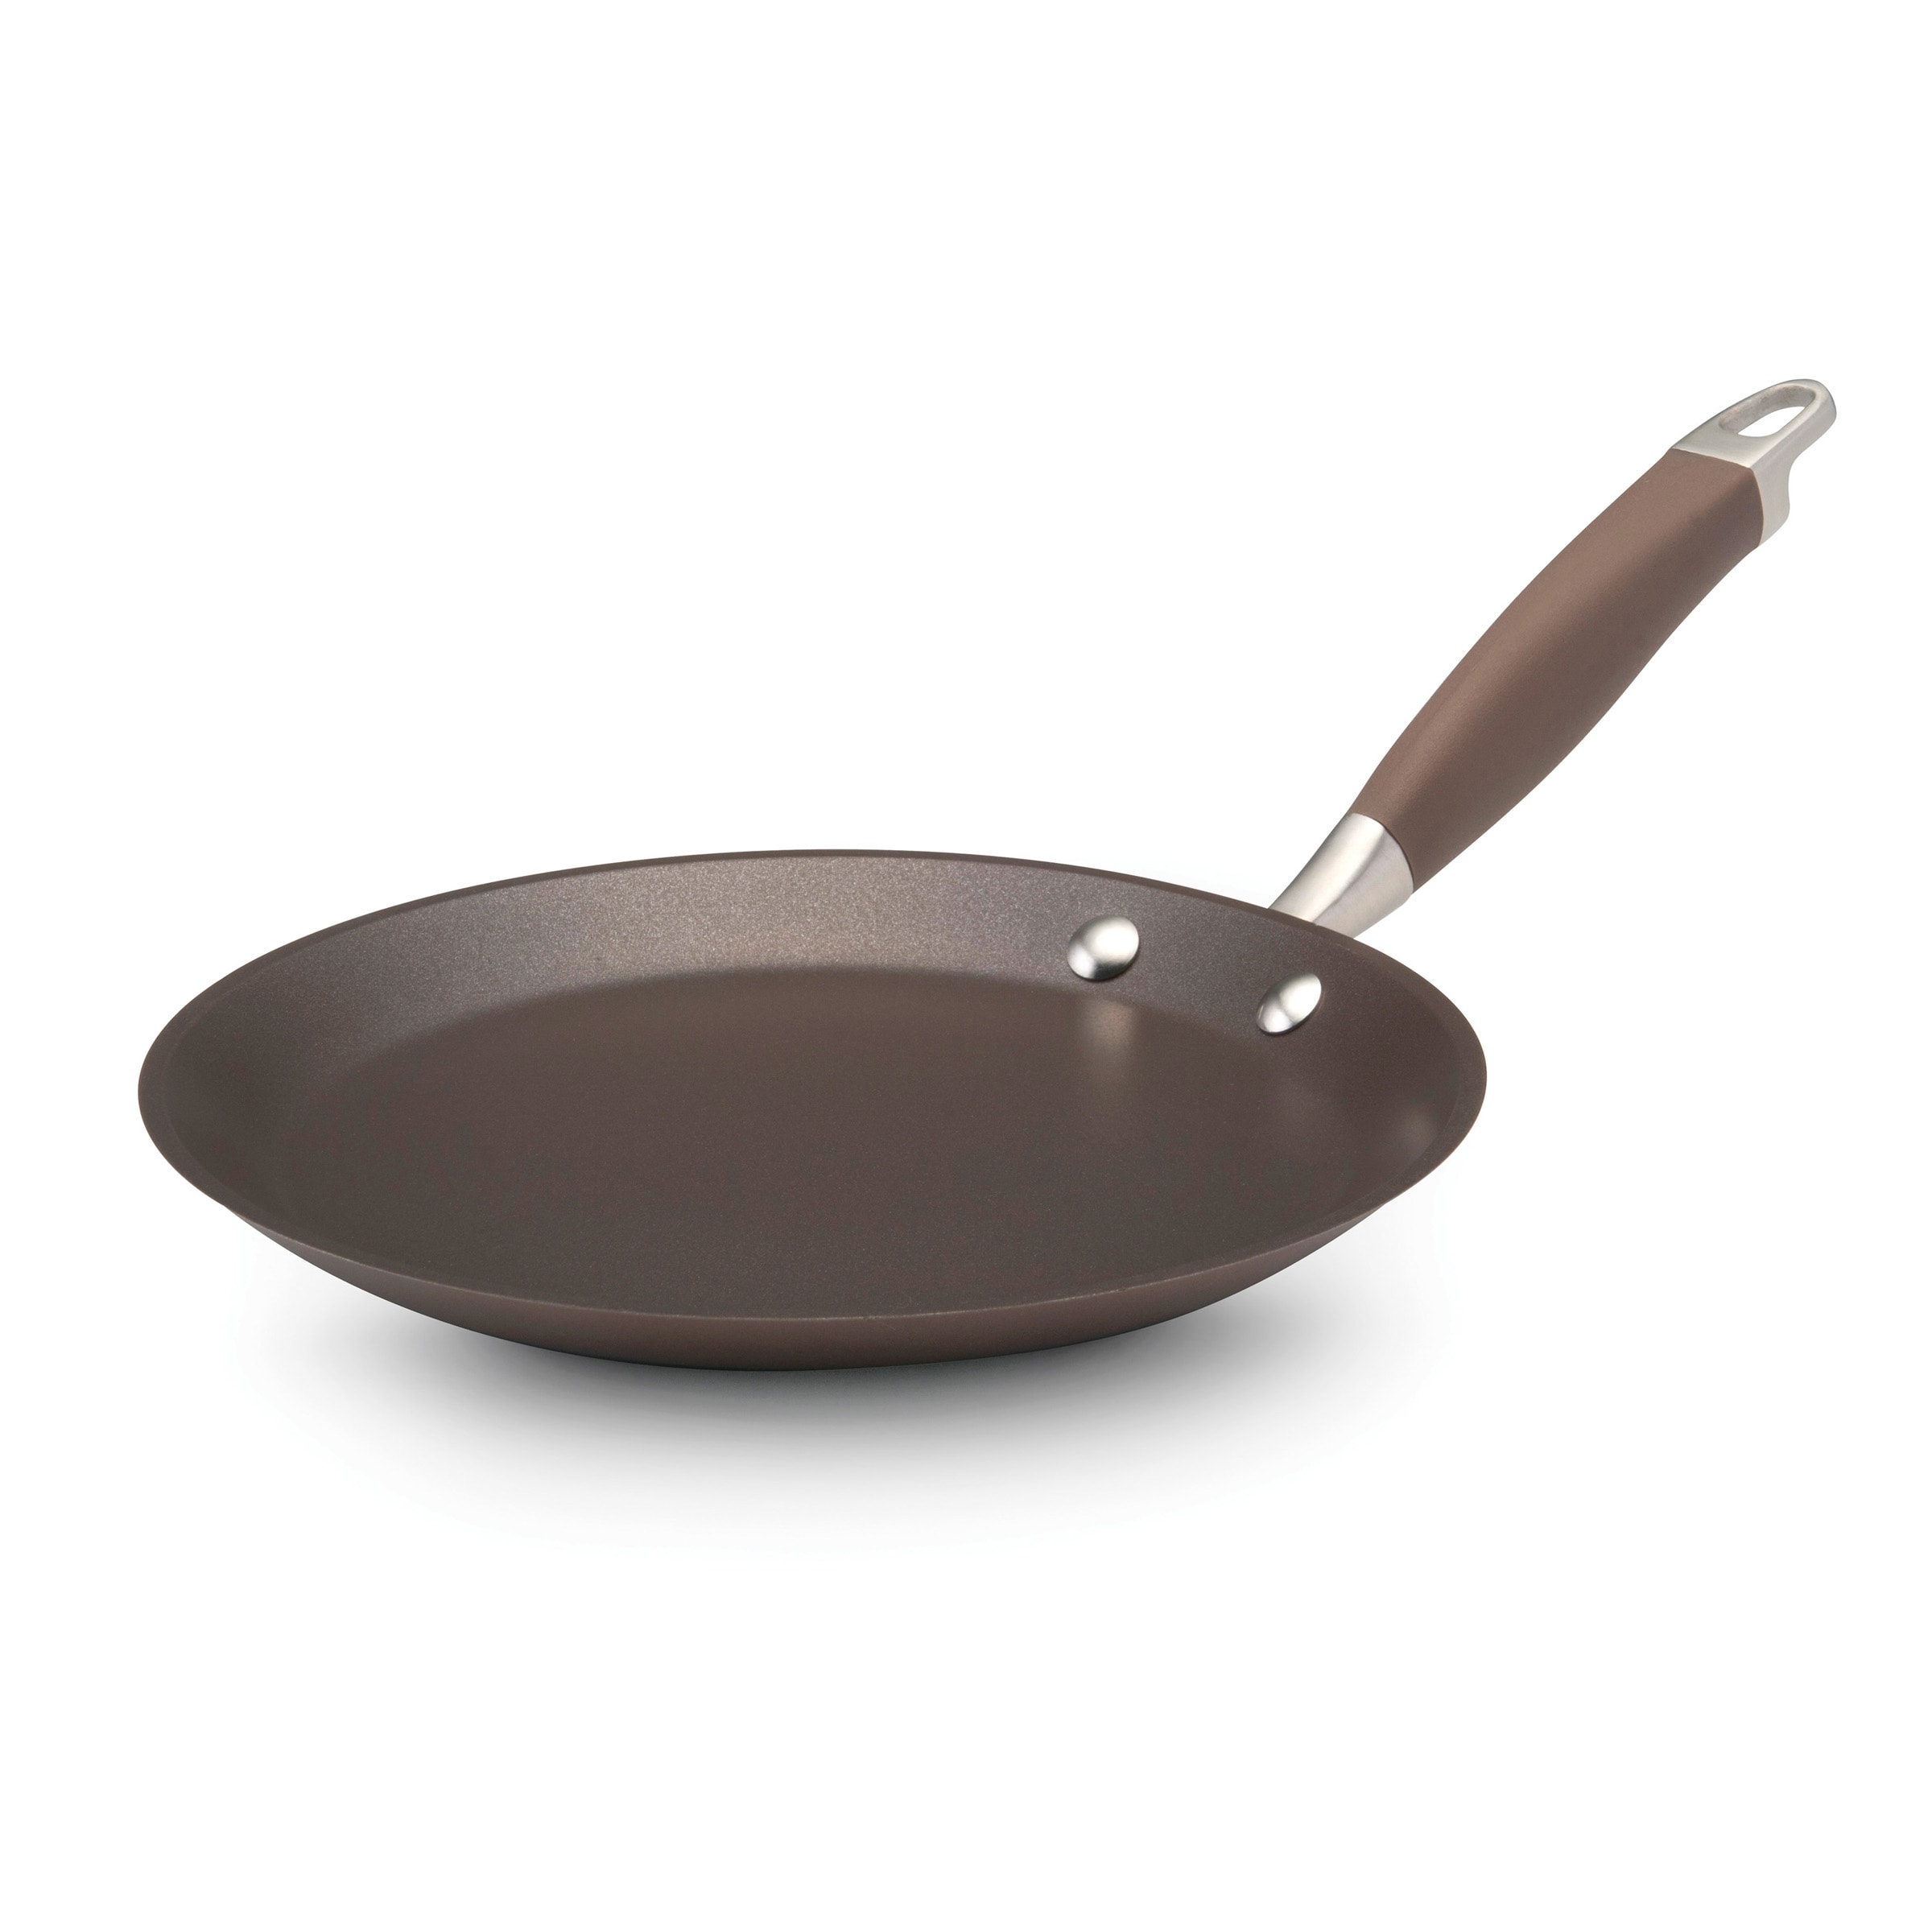 Anolon Advanced Hard Anodized Nonstick Frying Pan / Skillet, 8 Inch, Bronze  & Reviews